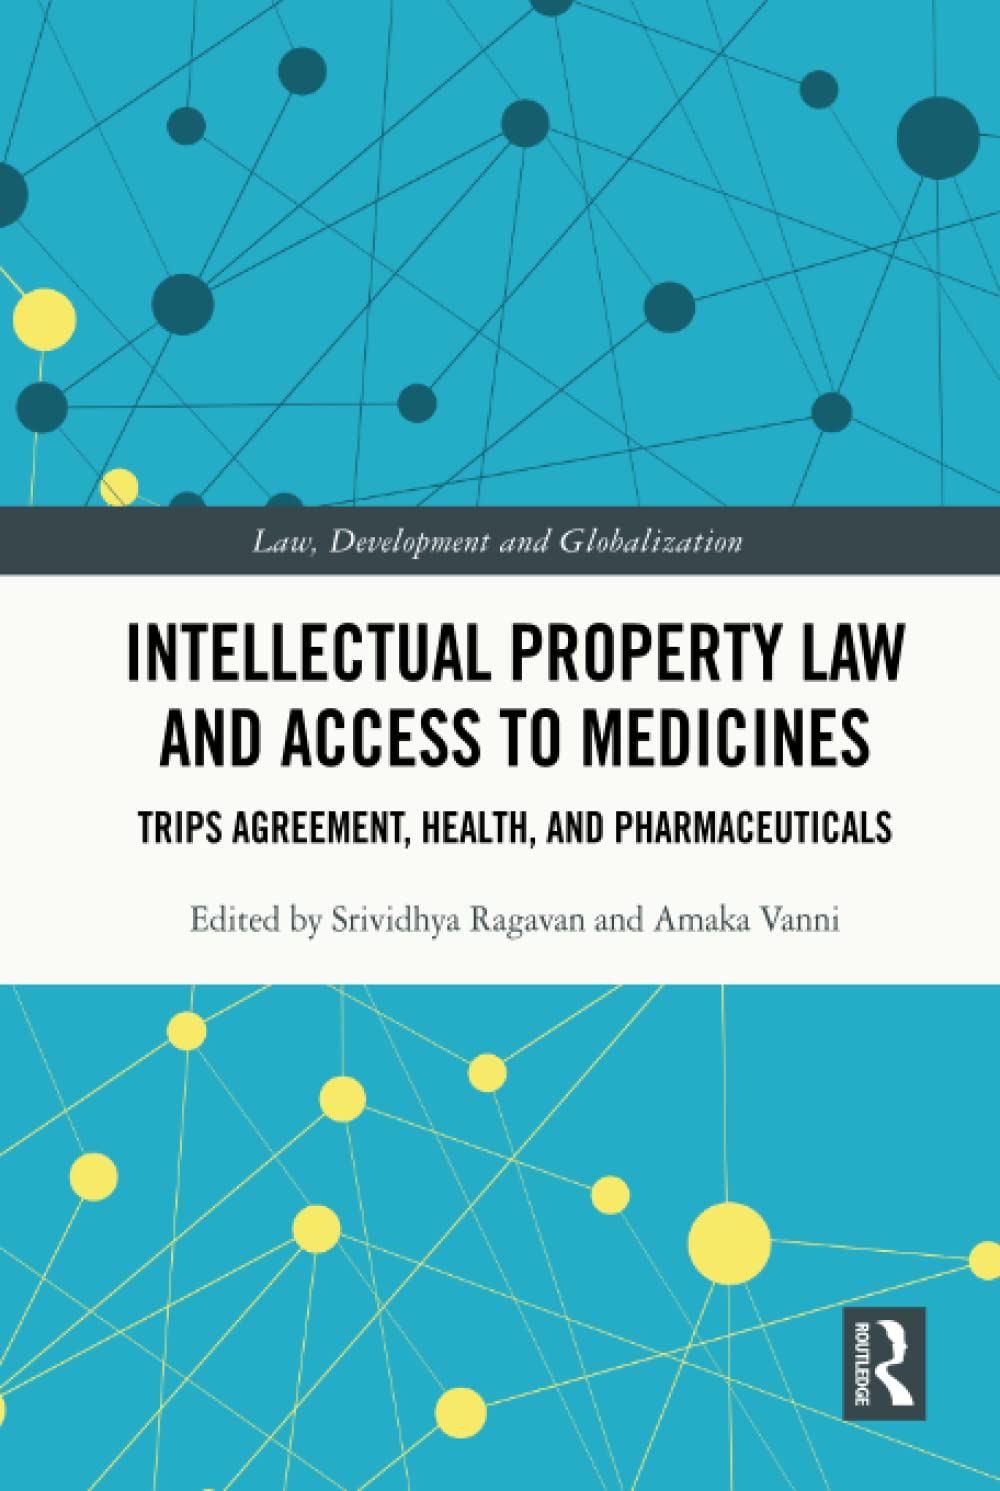 Intellectual Property Law and Access to Medicines (Law, Development and Globalization)